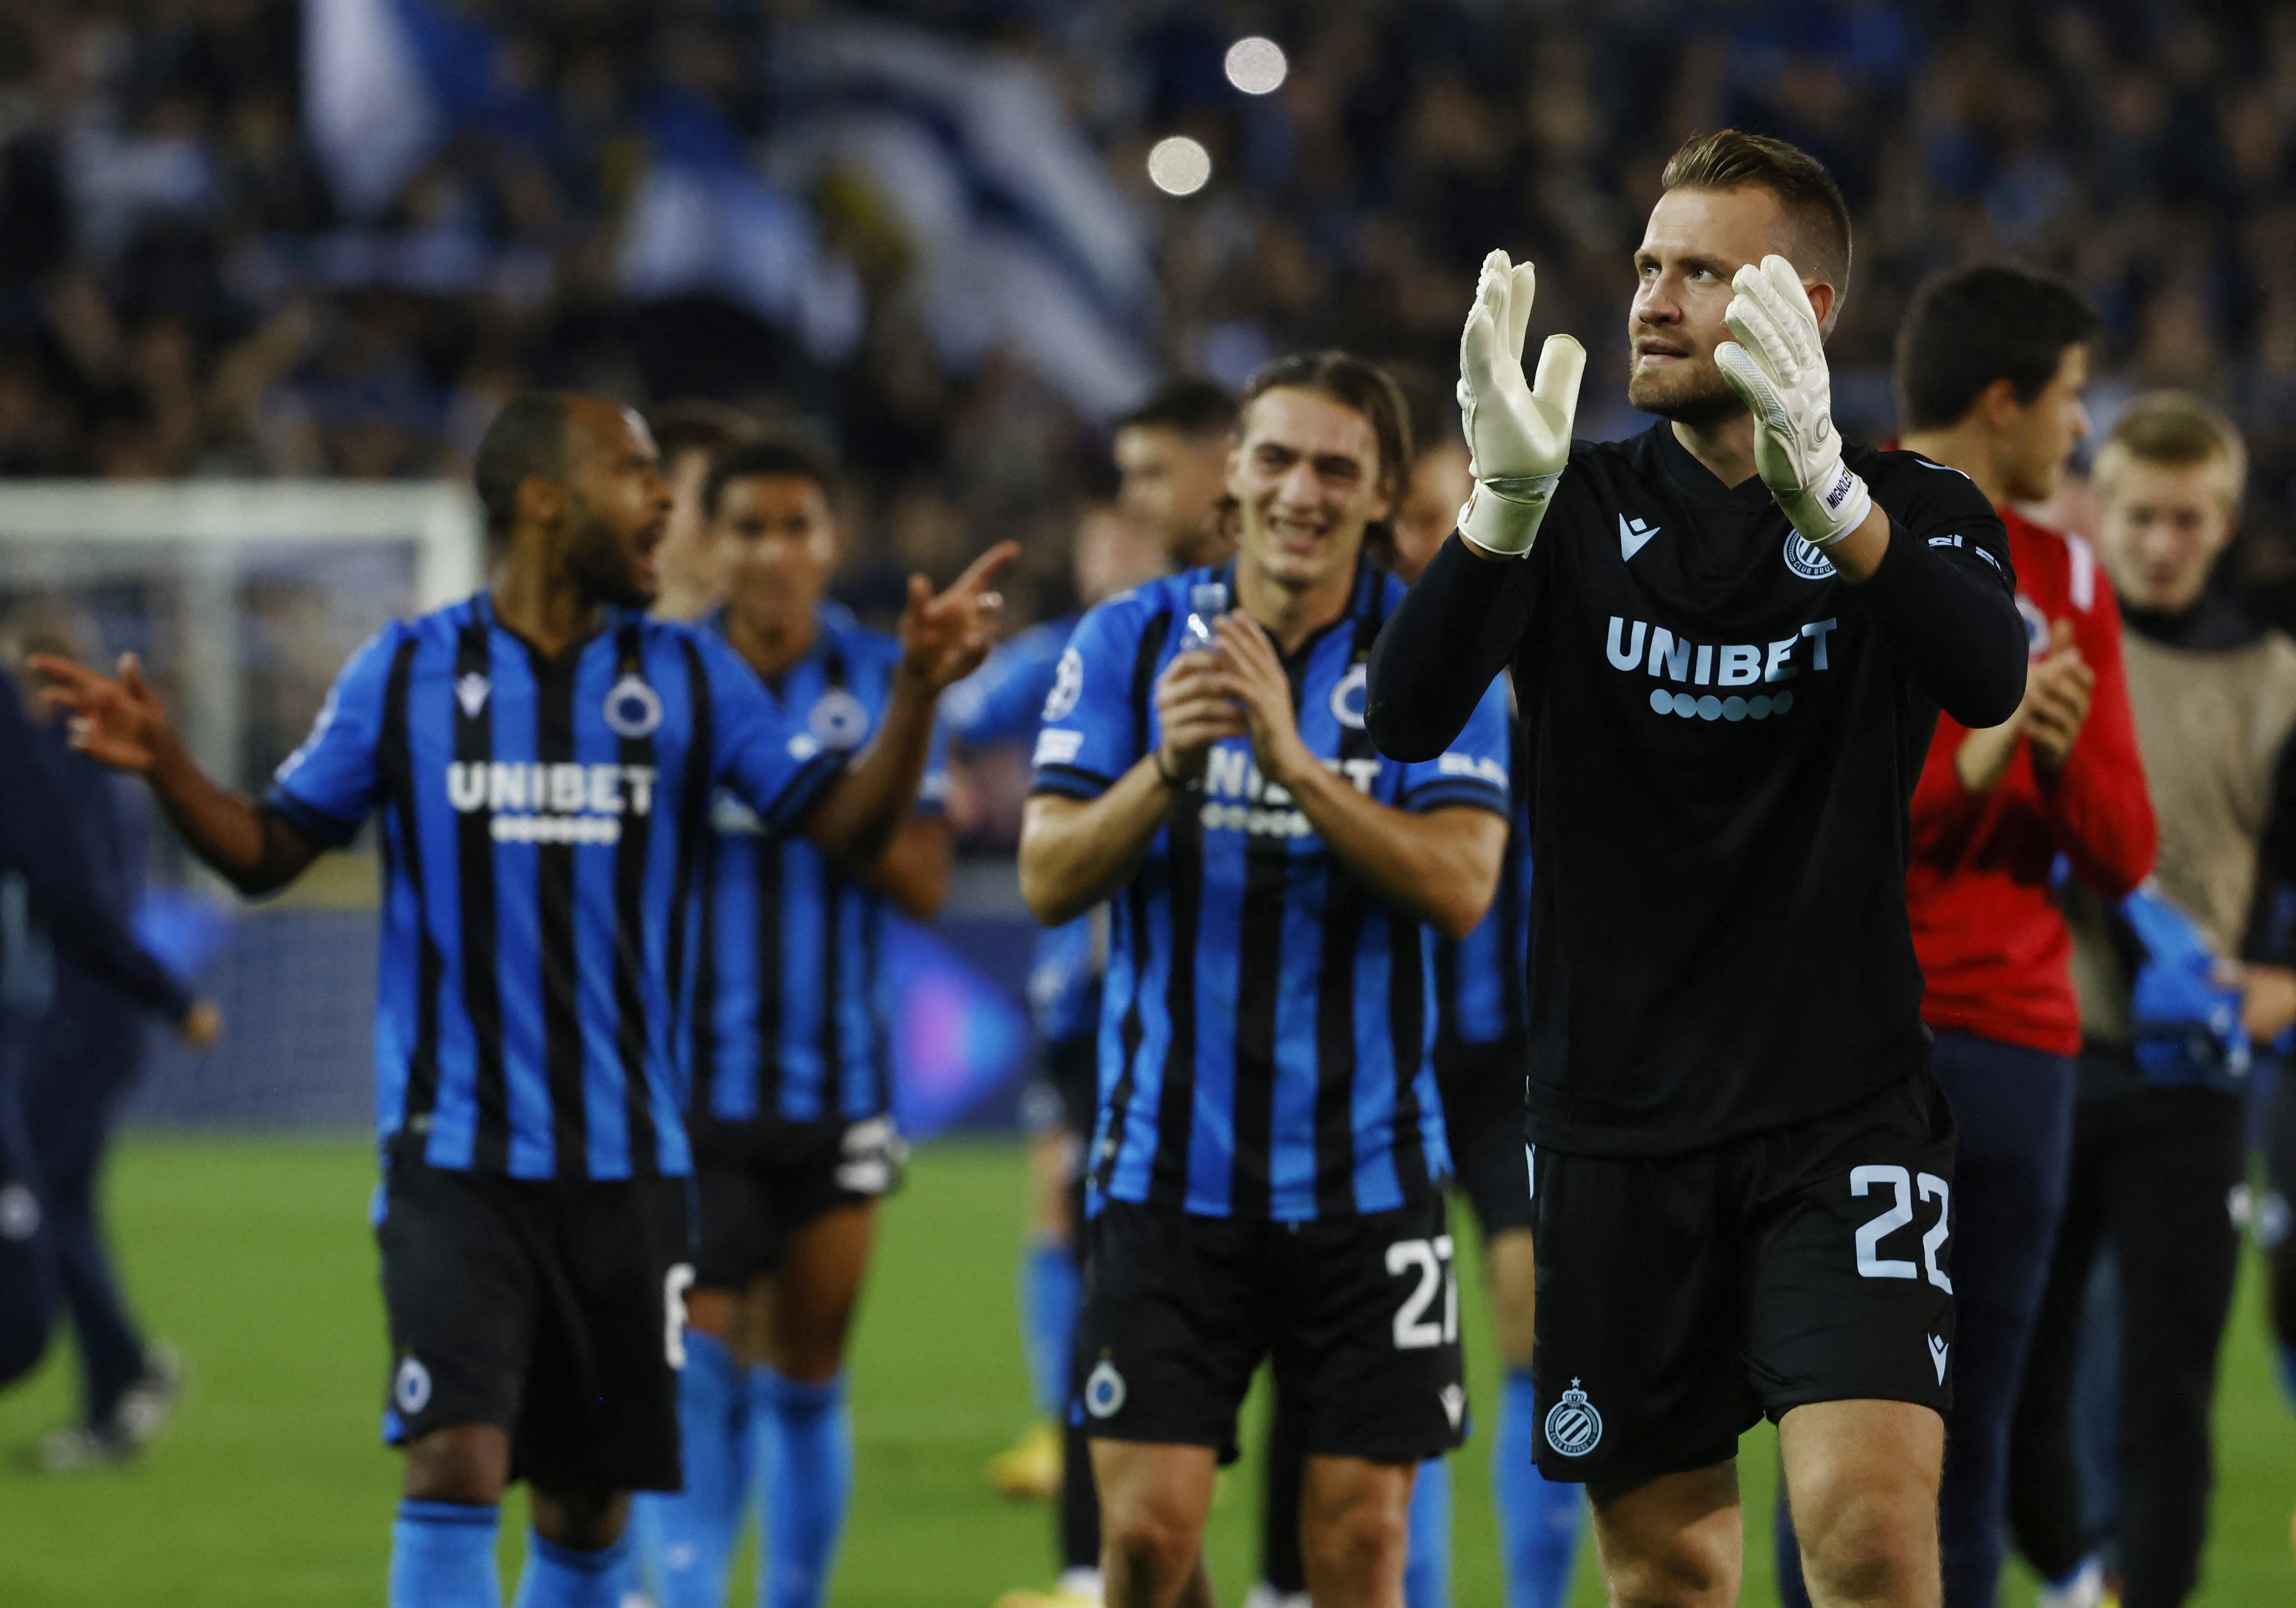 Brugge running on fumes of self-belief in Champions League